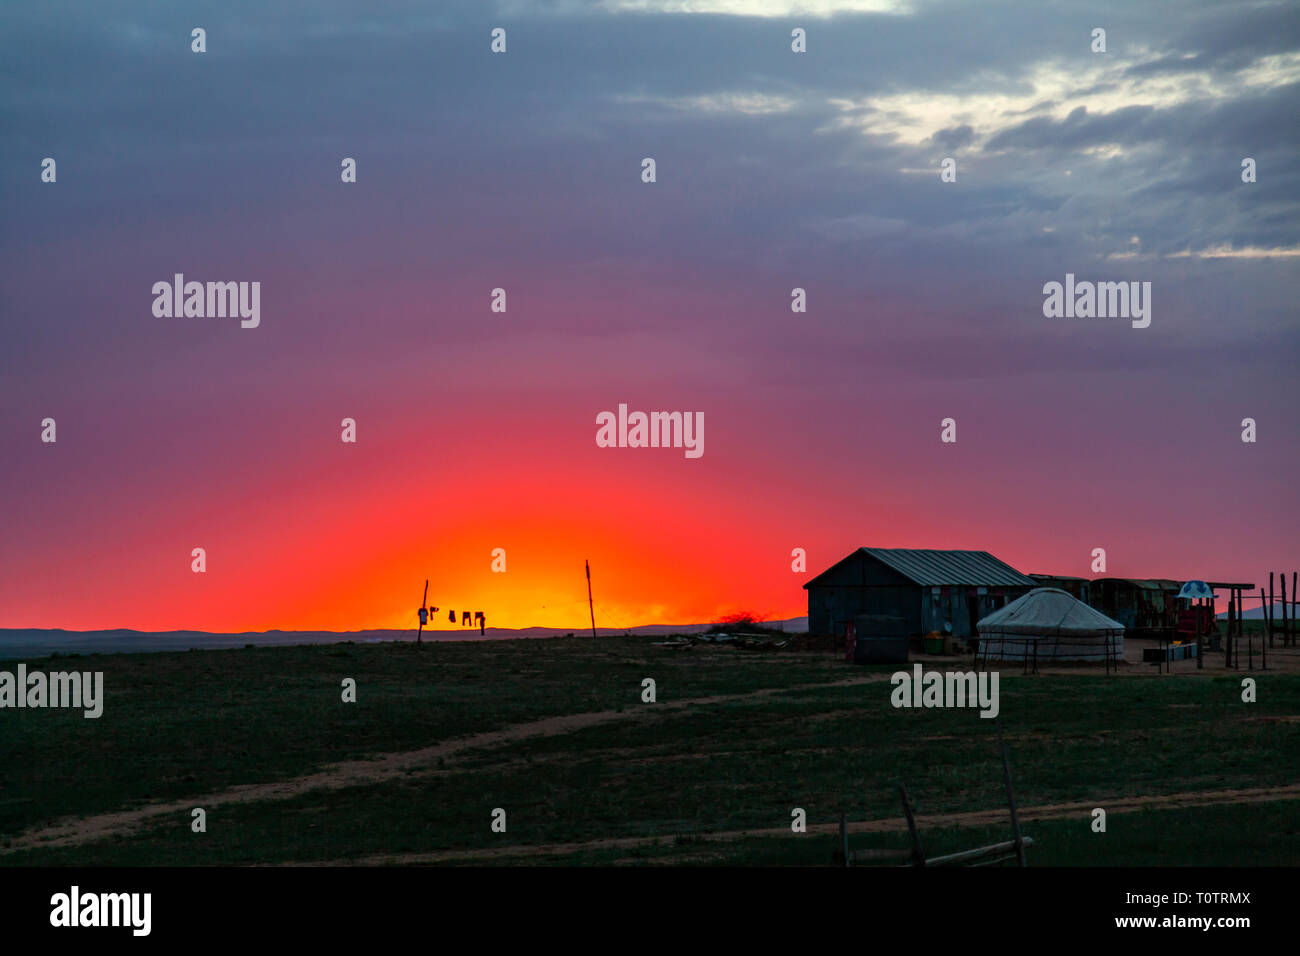 Sunrise over the Gegentala grasslands north of Hohhot, Inner Mongolia, China. Some clothes hanging to dry outside a house and a ger (yurt). Stock Photo